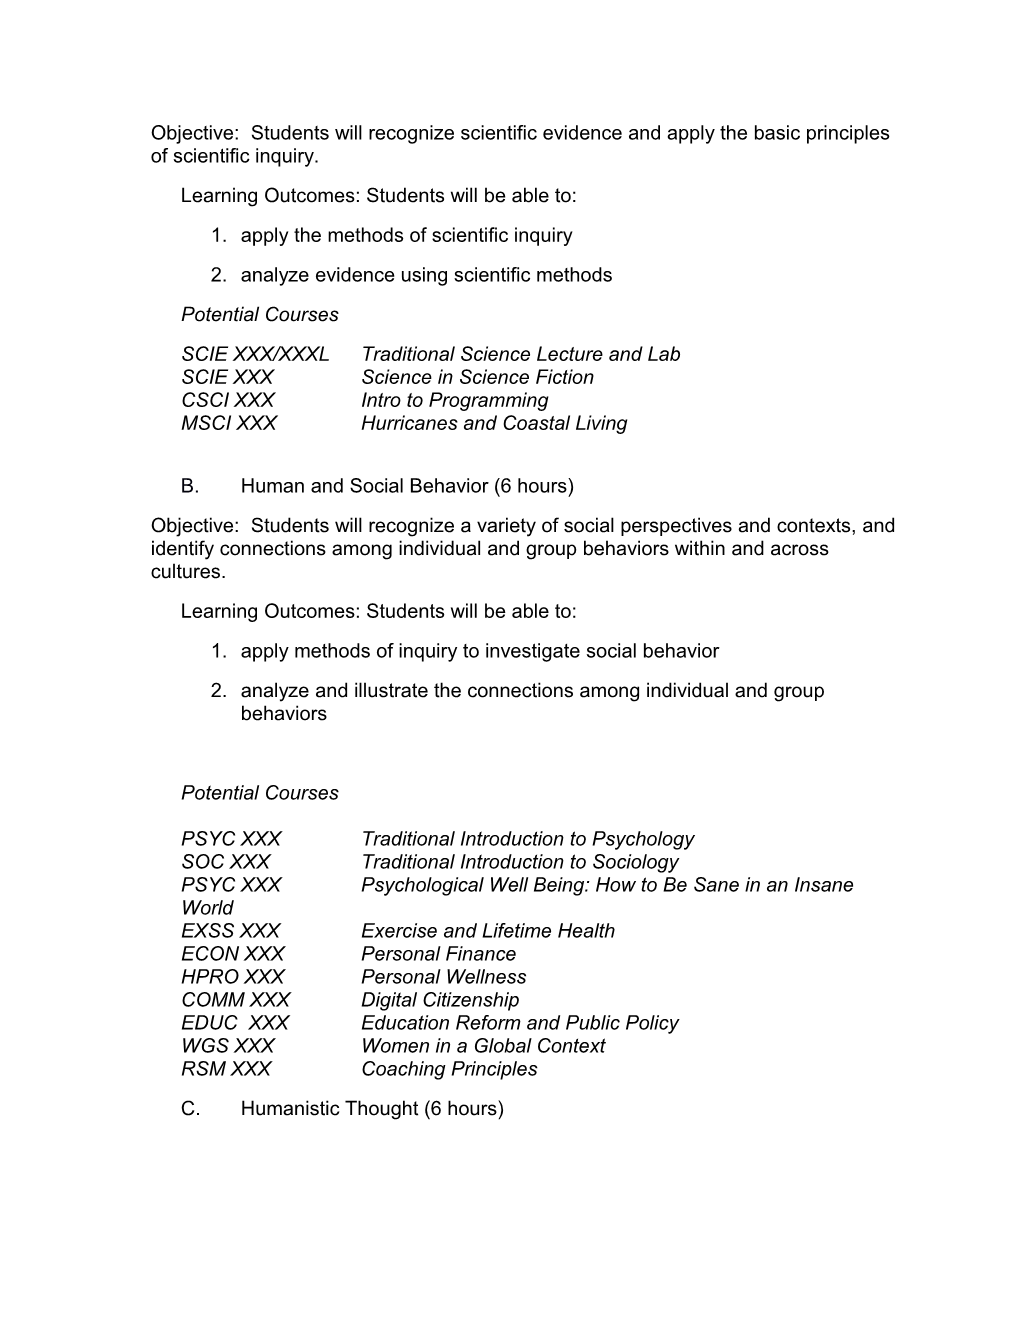 Core Curriculum Draft with Goals, Objectives, and Learning Outcomes